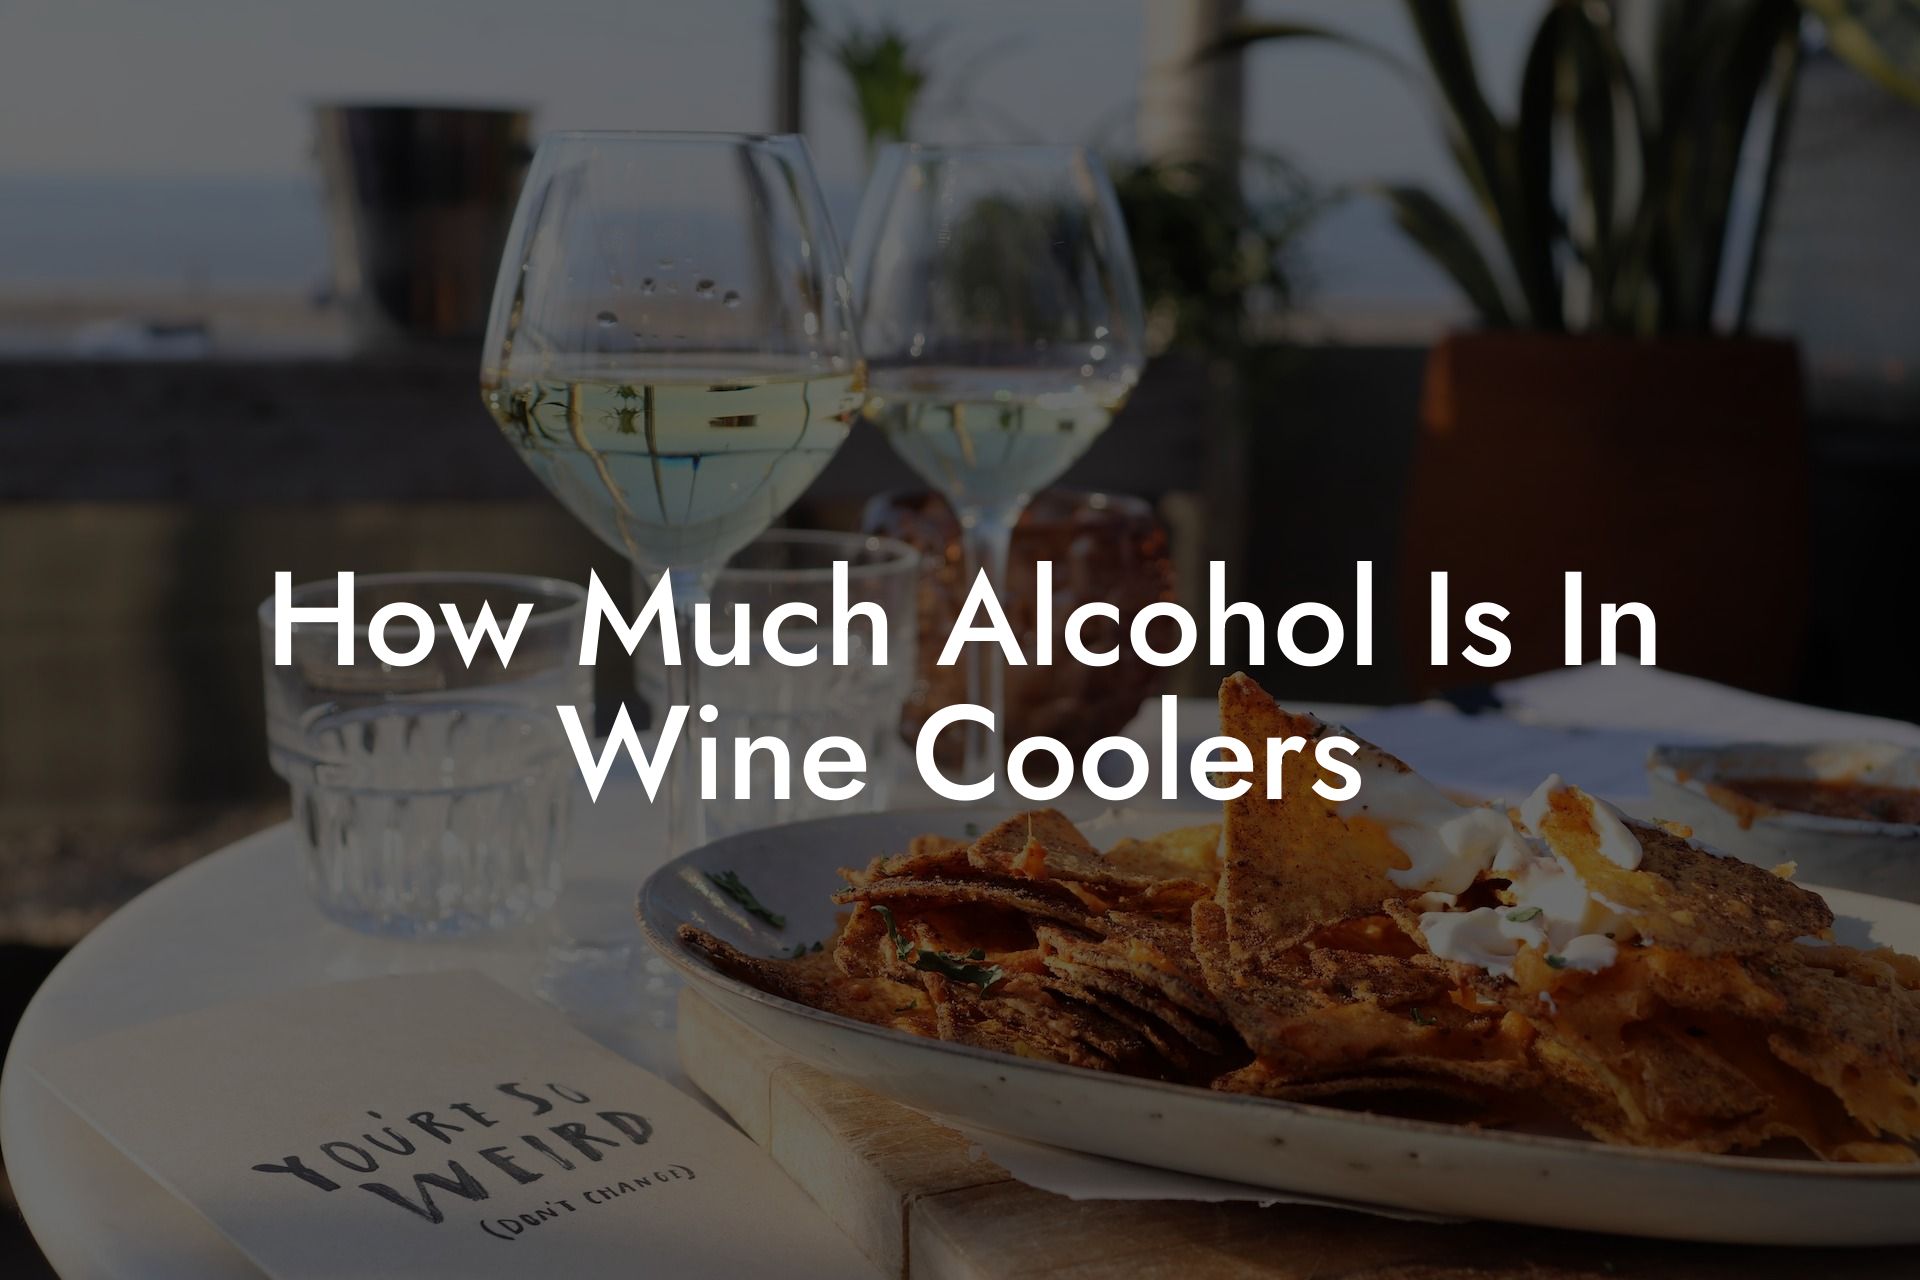 How Much Alcohol Is In Wine Coolers